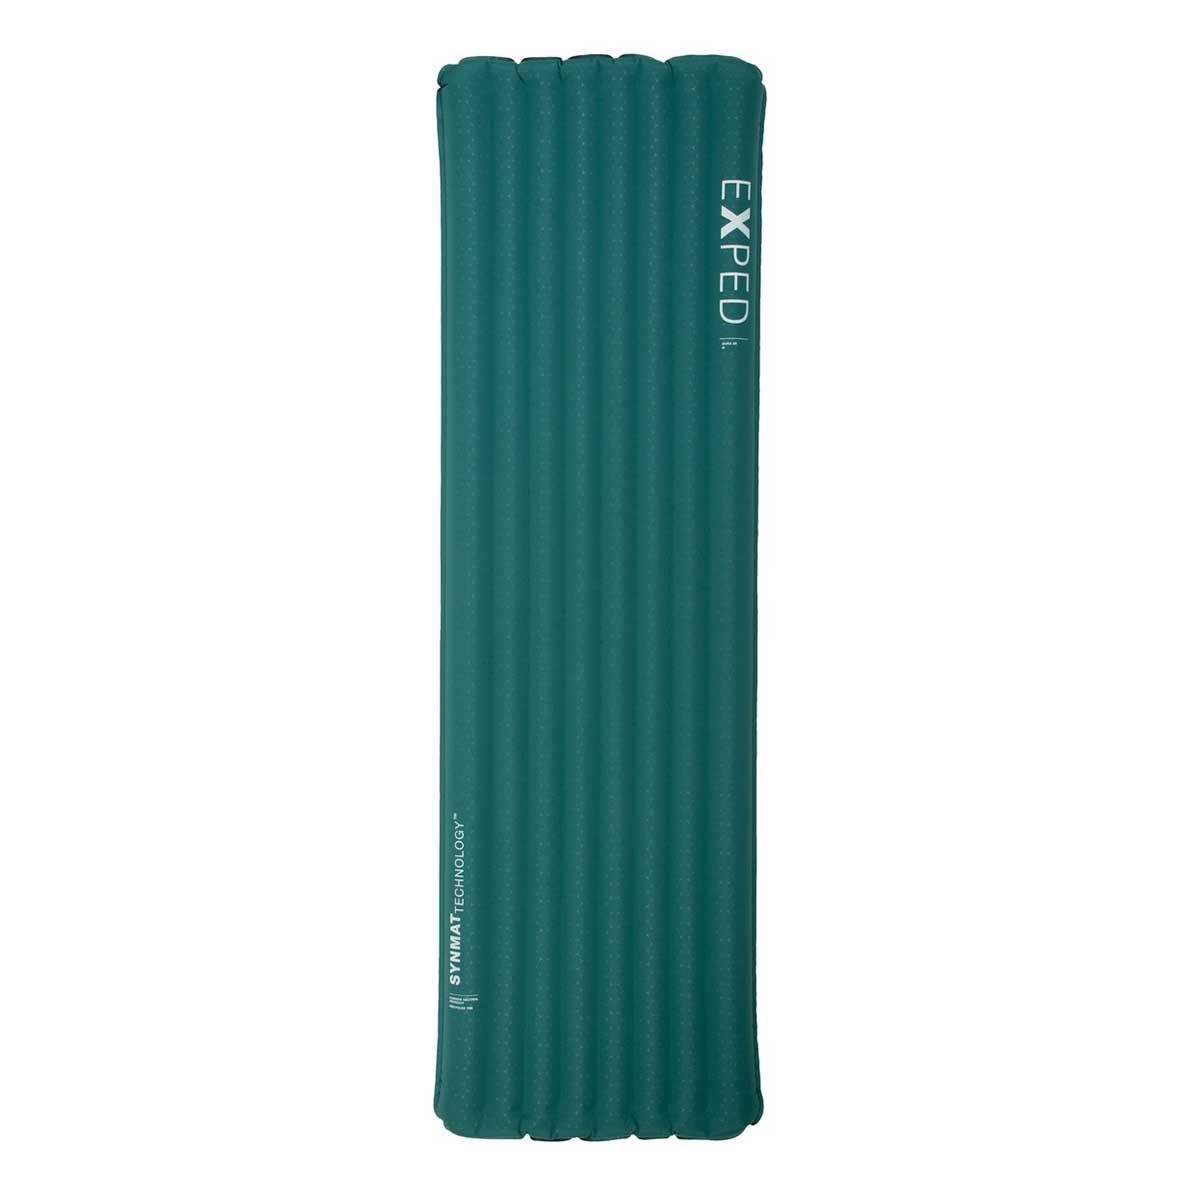 Matelas gonflable Exped Dura 5R